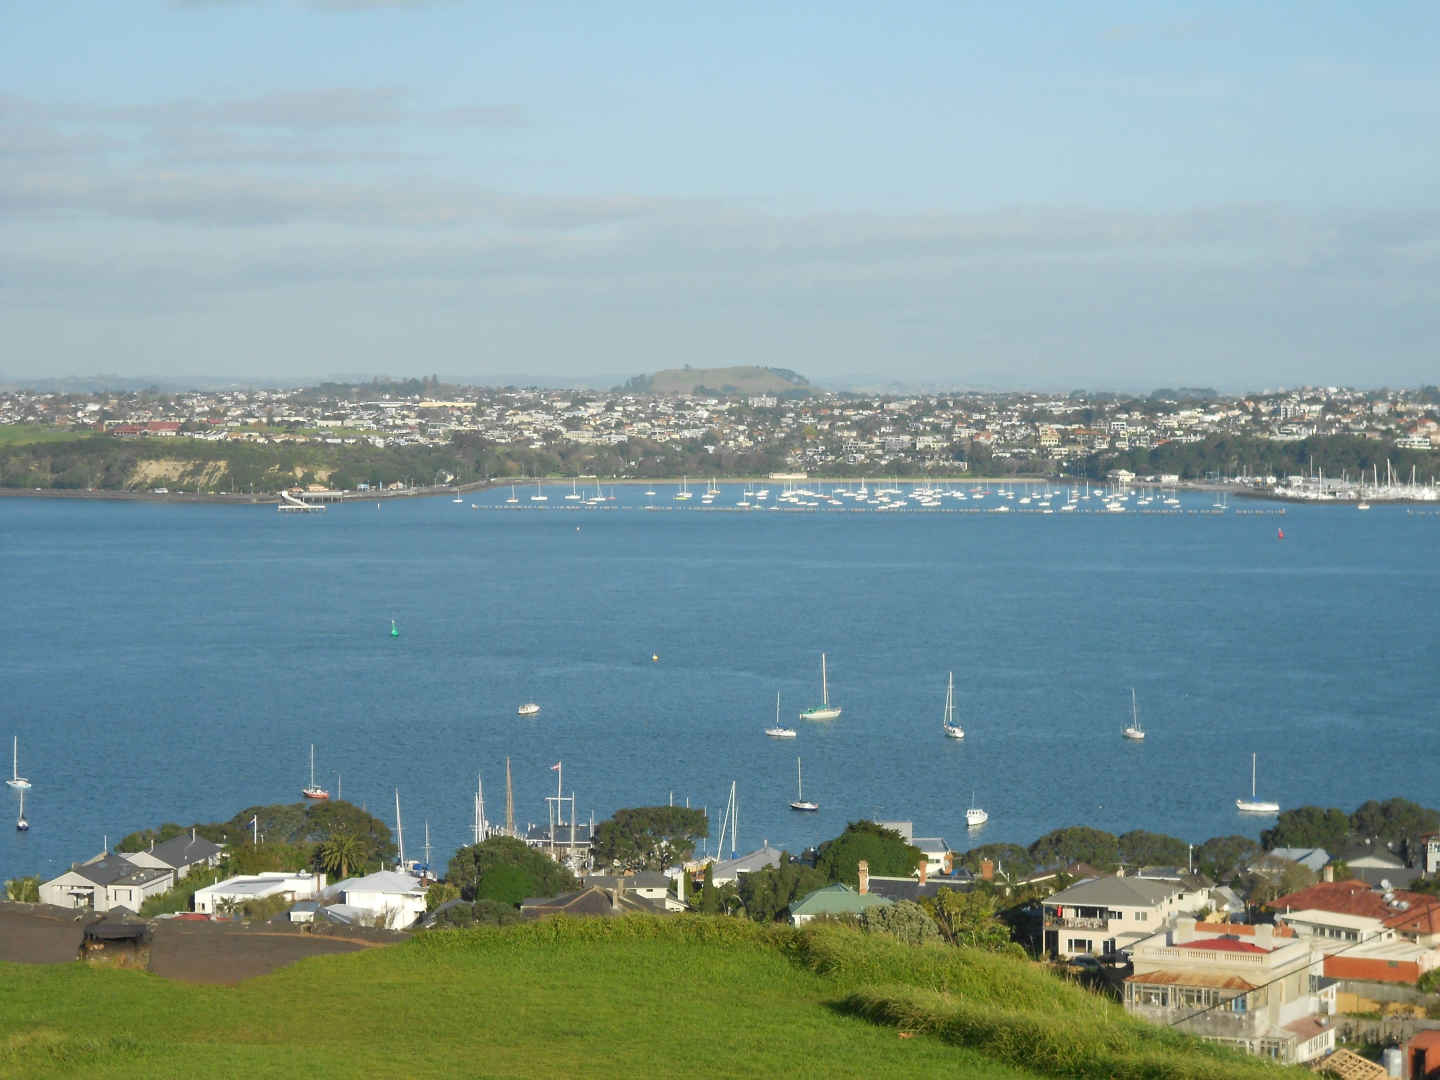 These are the Most Delightful Things to Do in Devonport